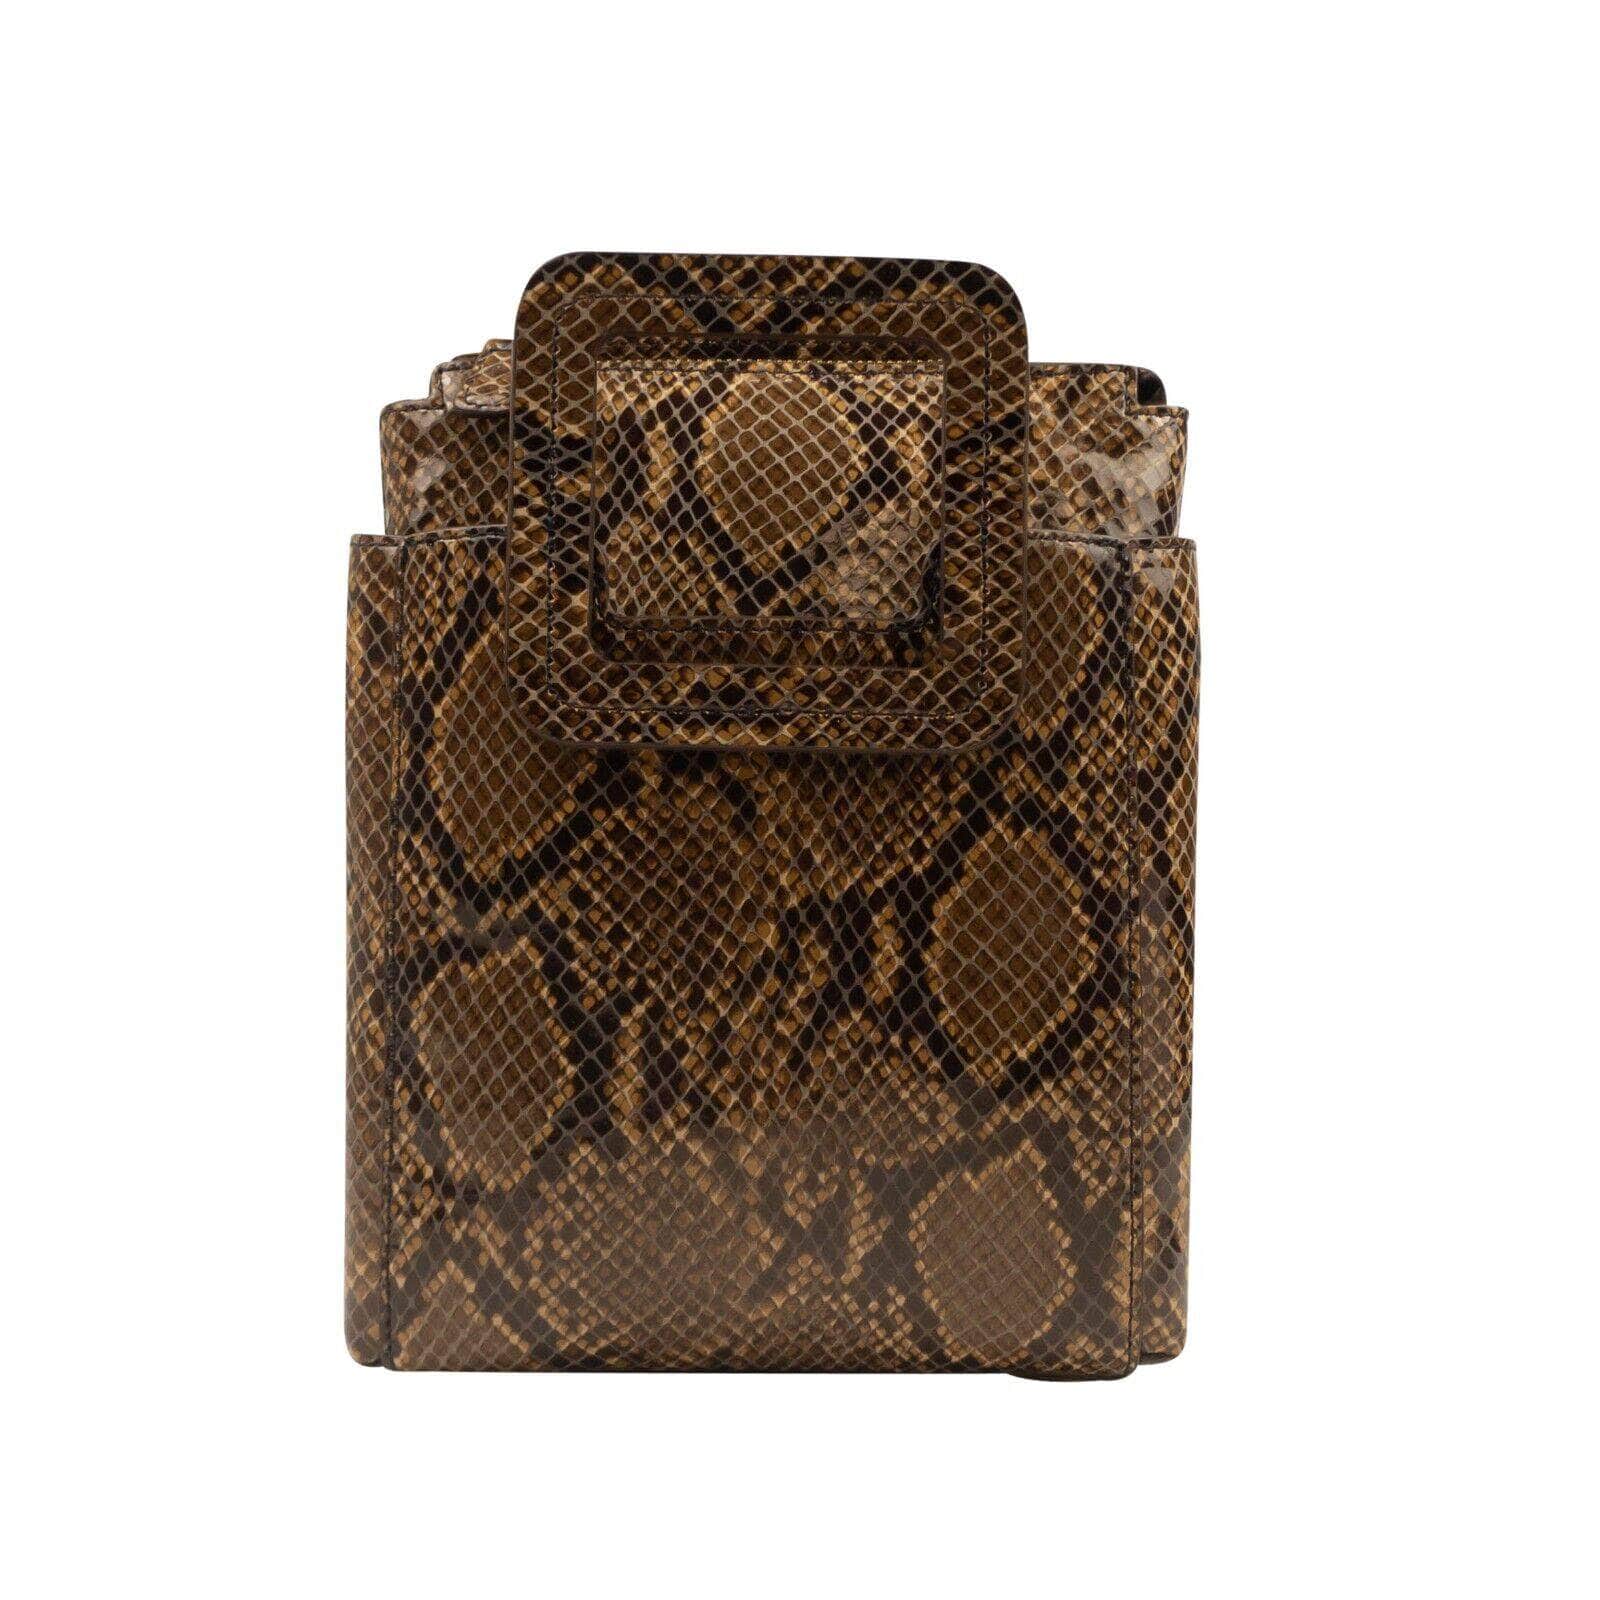 Staud channelenable-all, chicmi, couponcollection, gender-womens, main-handbags, MixedApparel, size-os, staud, under-250, womens-clutches-pouches OS Caramel Brown Snake Mini Shirley Bag 95-STD-3006/OS 95-STD-3006/OS